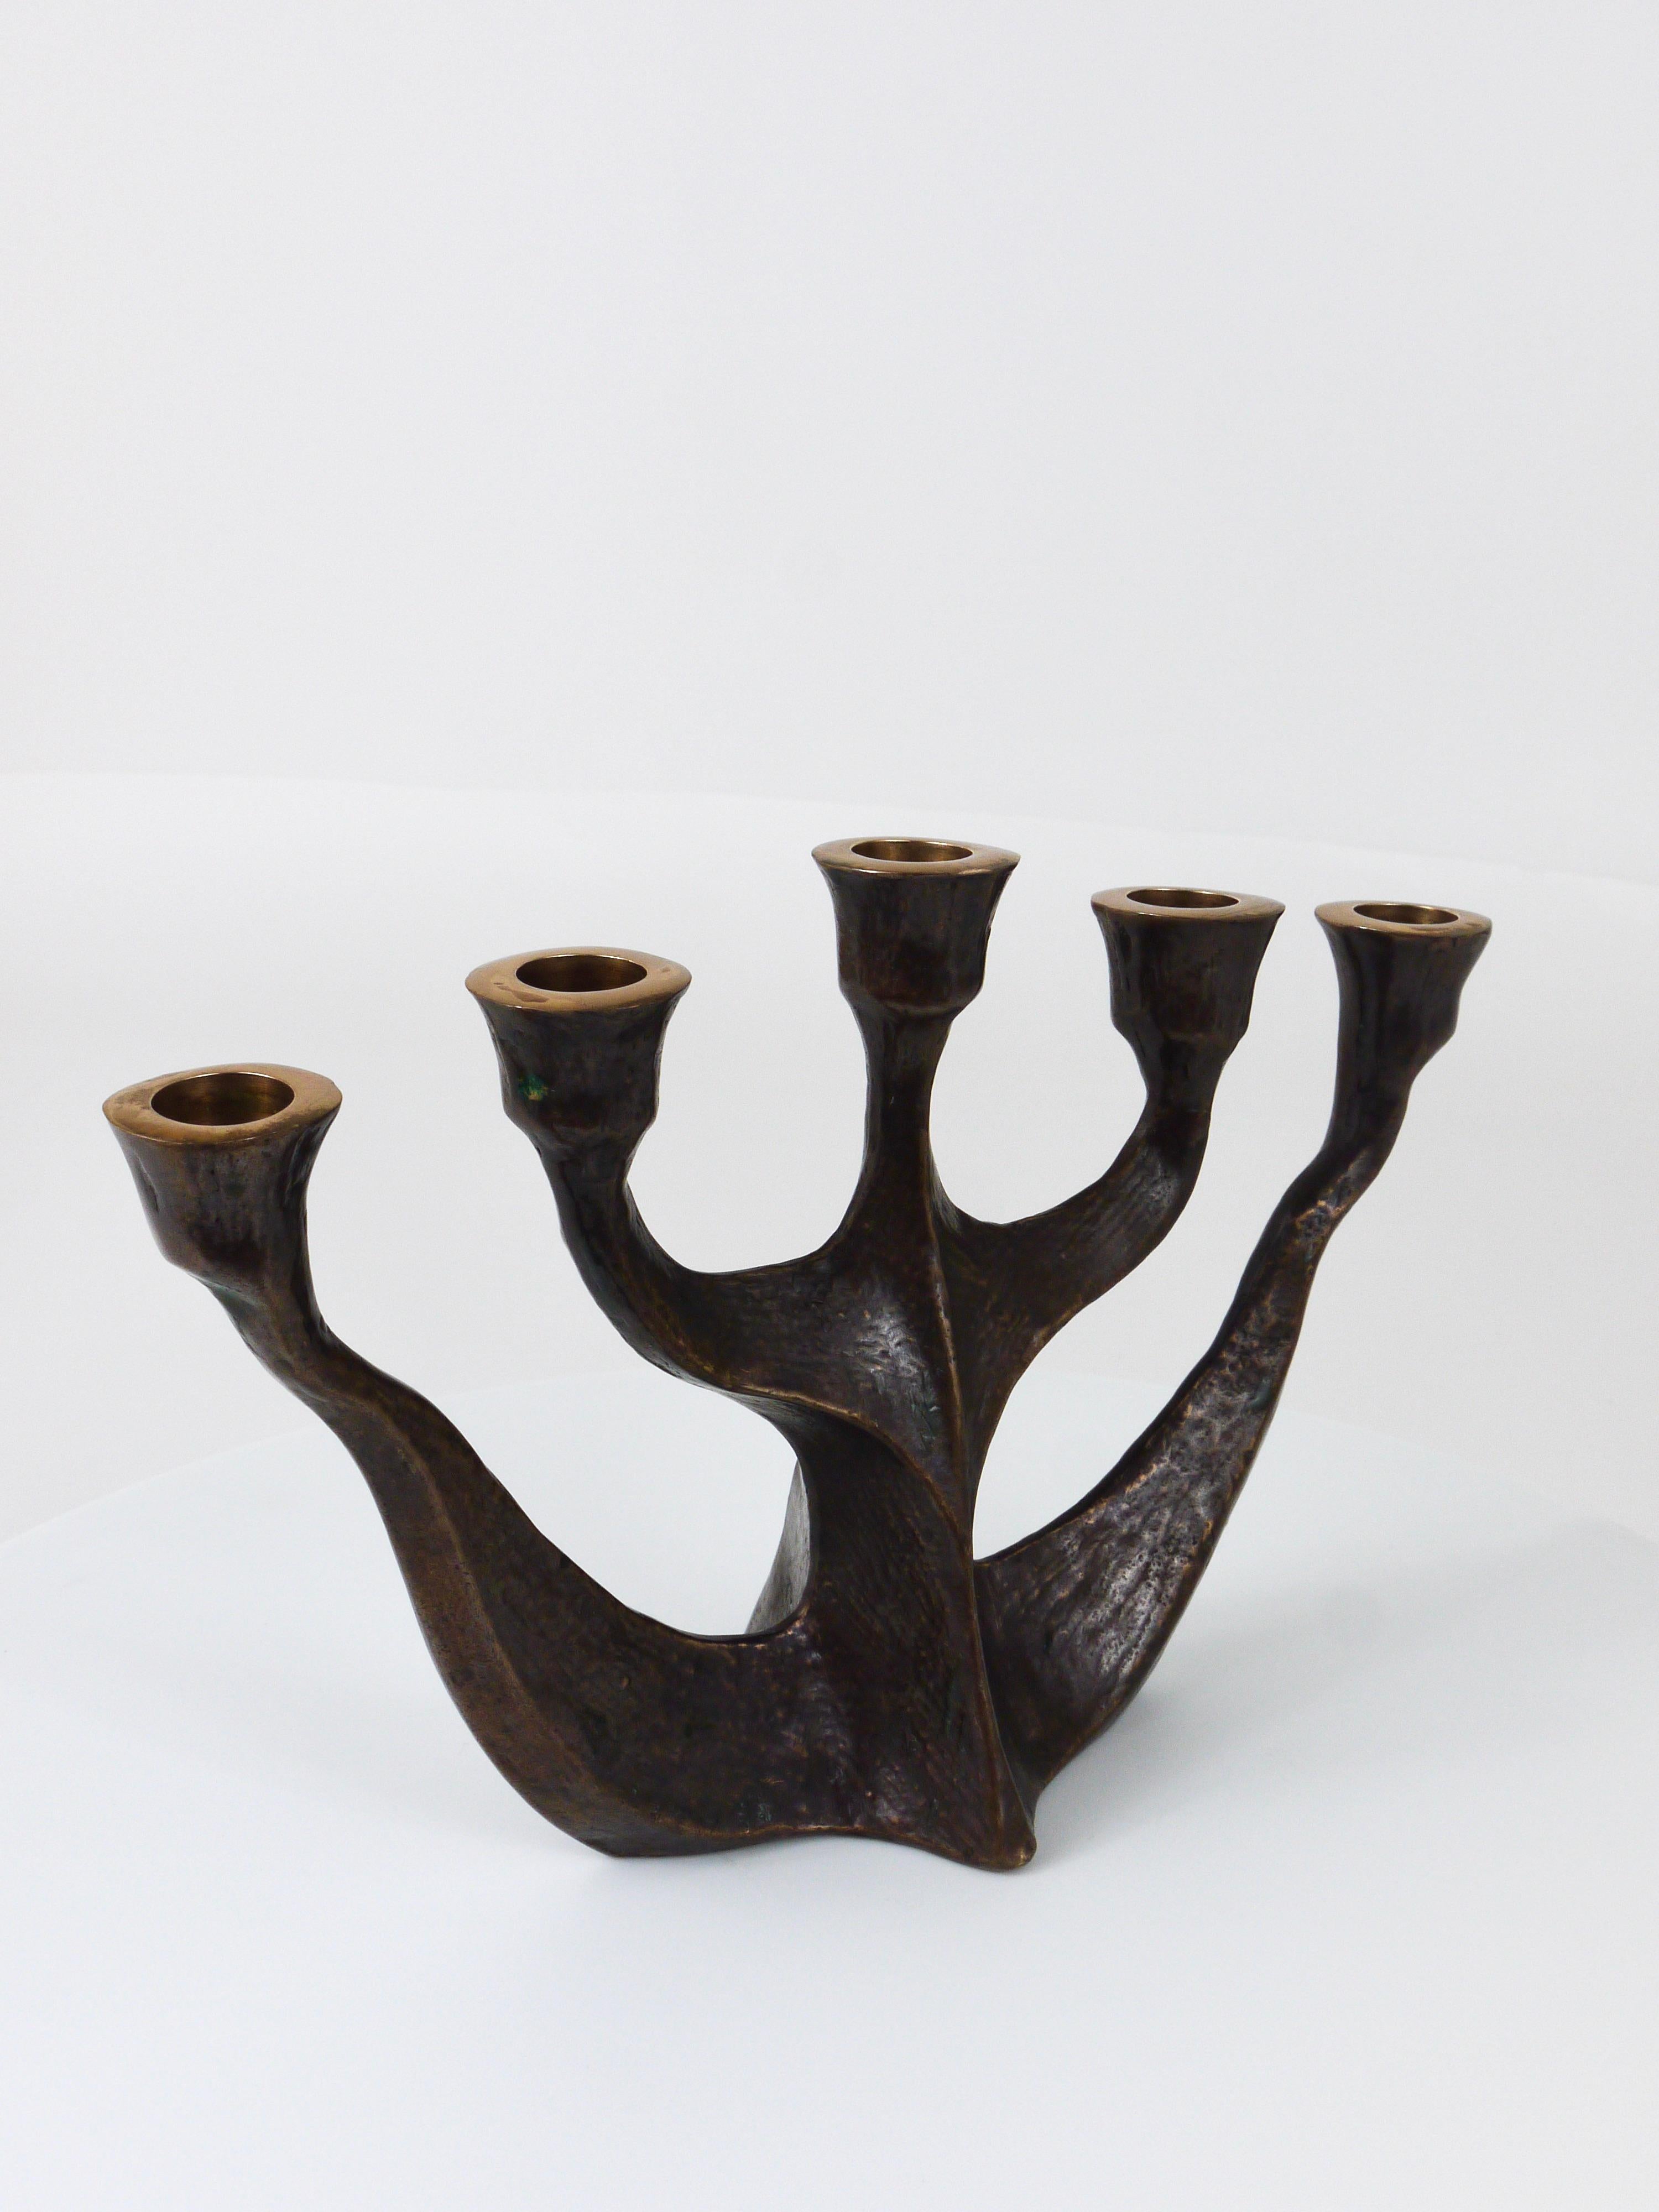 Up to Two Midcentury Brutalist Bronze Candleholders by Michael Harjes, 1960s For Sale 11